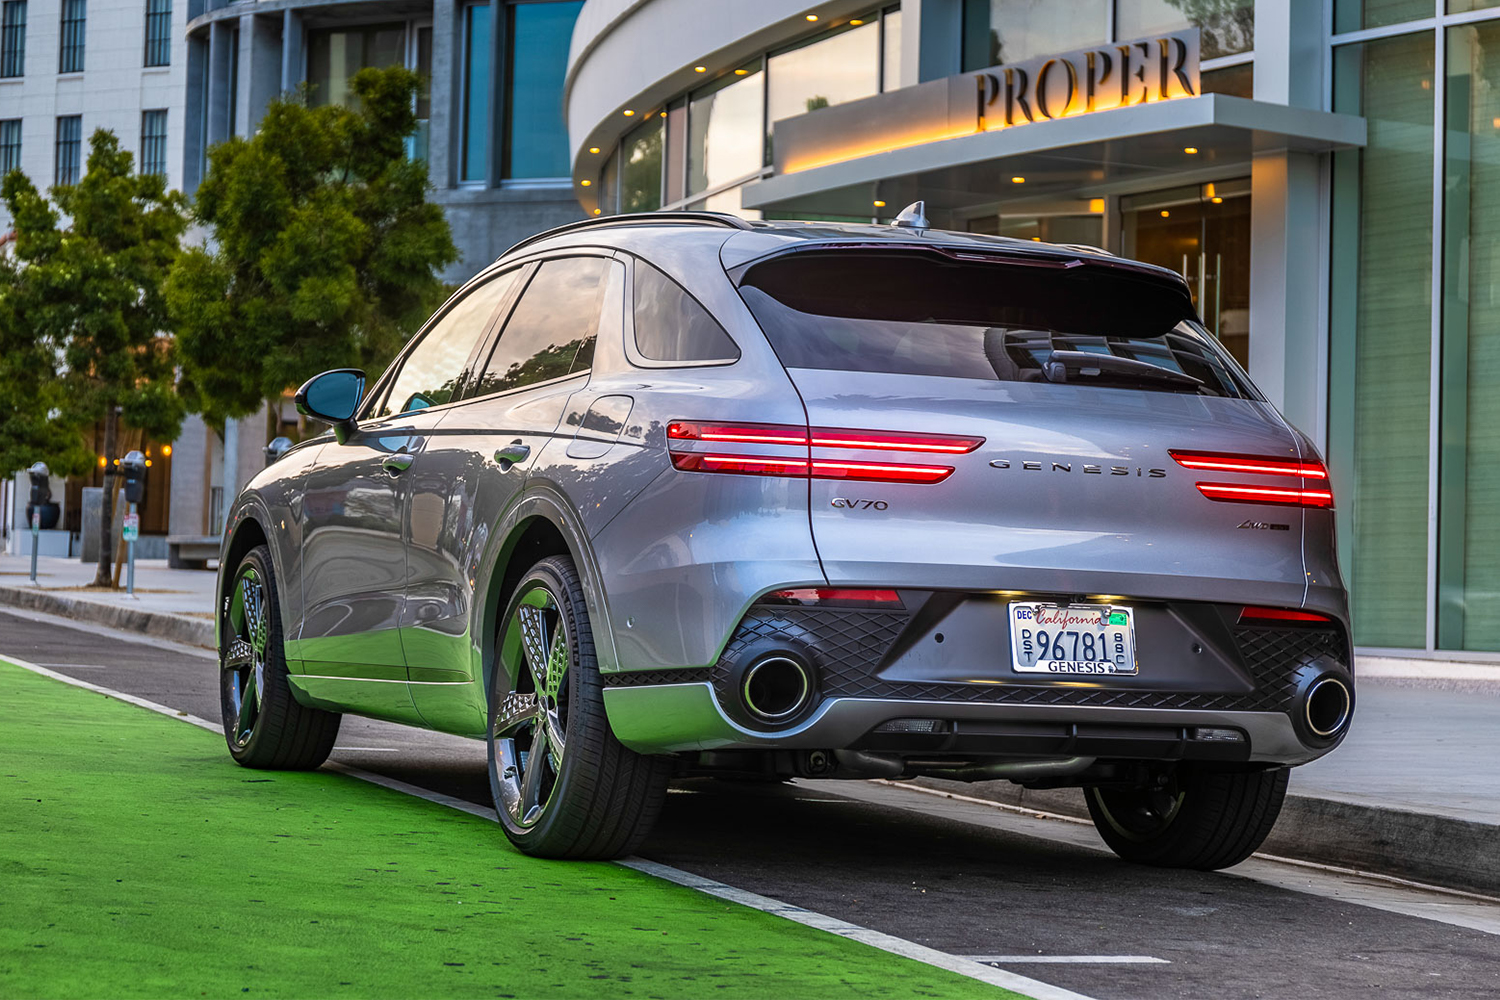 The back end of the new 2022 Genesis GV70 SUV, showing the taillights and exhaust pipes